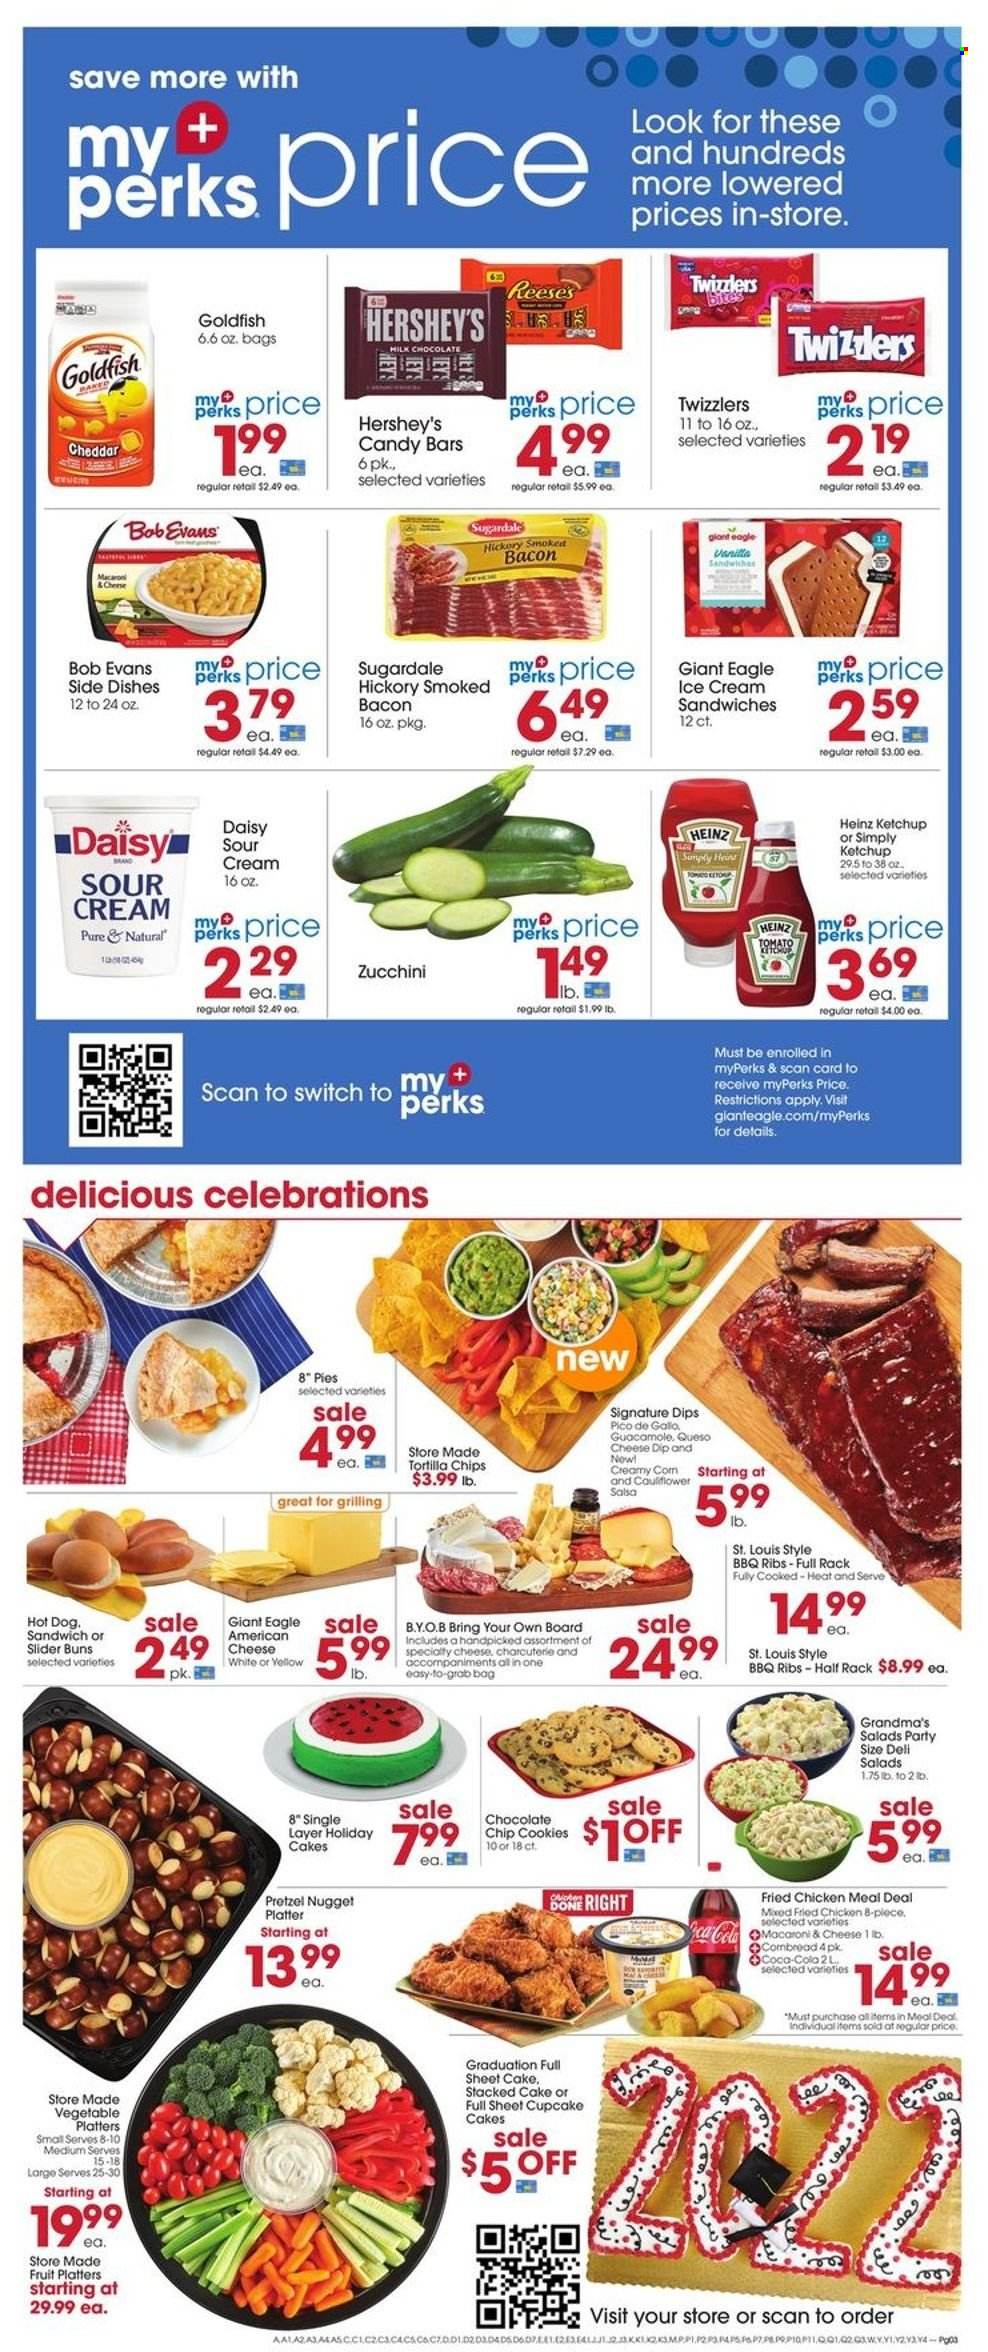 thumbnail - Giant Eagle Flyer - 05/26/2022 - 06/01/2022 - Sales products - pretzels, cake, buns, cupcake, zucchini, hot dog, fried chicken, Bob Evans, Sugardale, bacon, guacamole, american cheese, sour cream, ice cream, ice cream sandwich, Reese's, Hershey's, cookies, milk chocolate, Celebration, tortilla chips, chips, Goldfish, Heinz, ketchup, salsa, Coca-Cola, switch. Page 3.